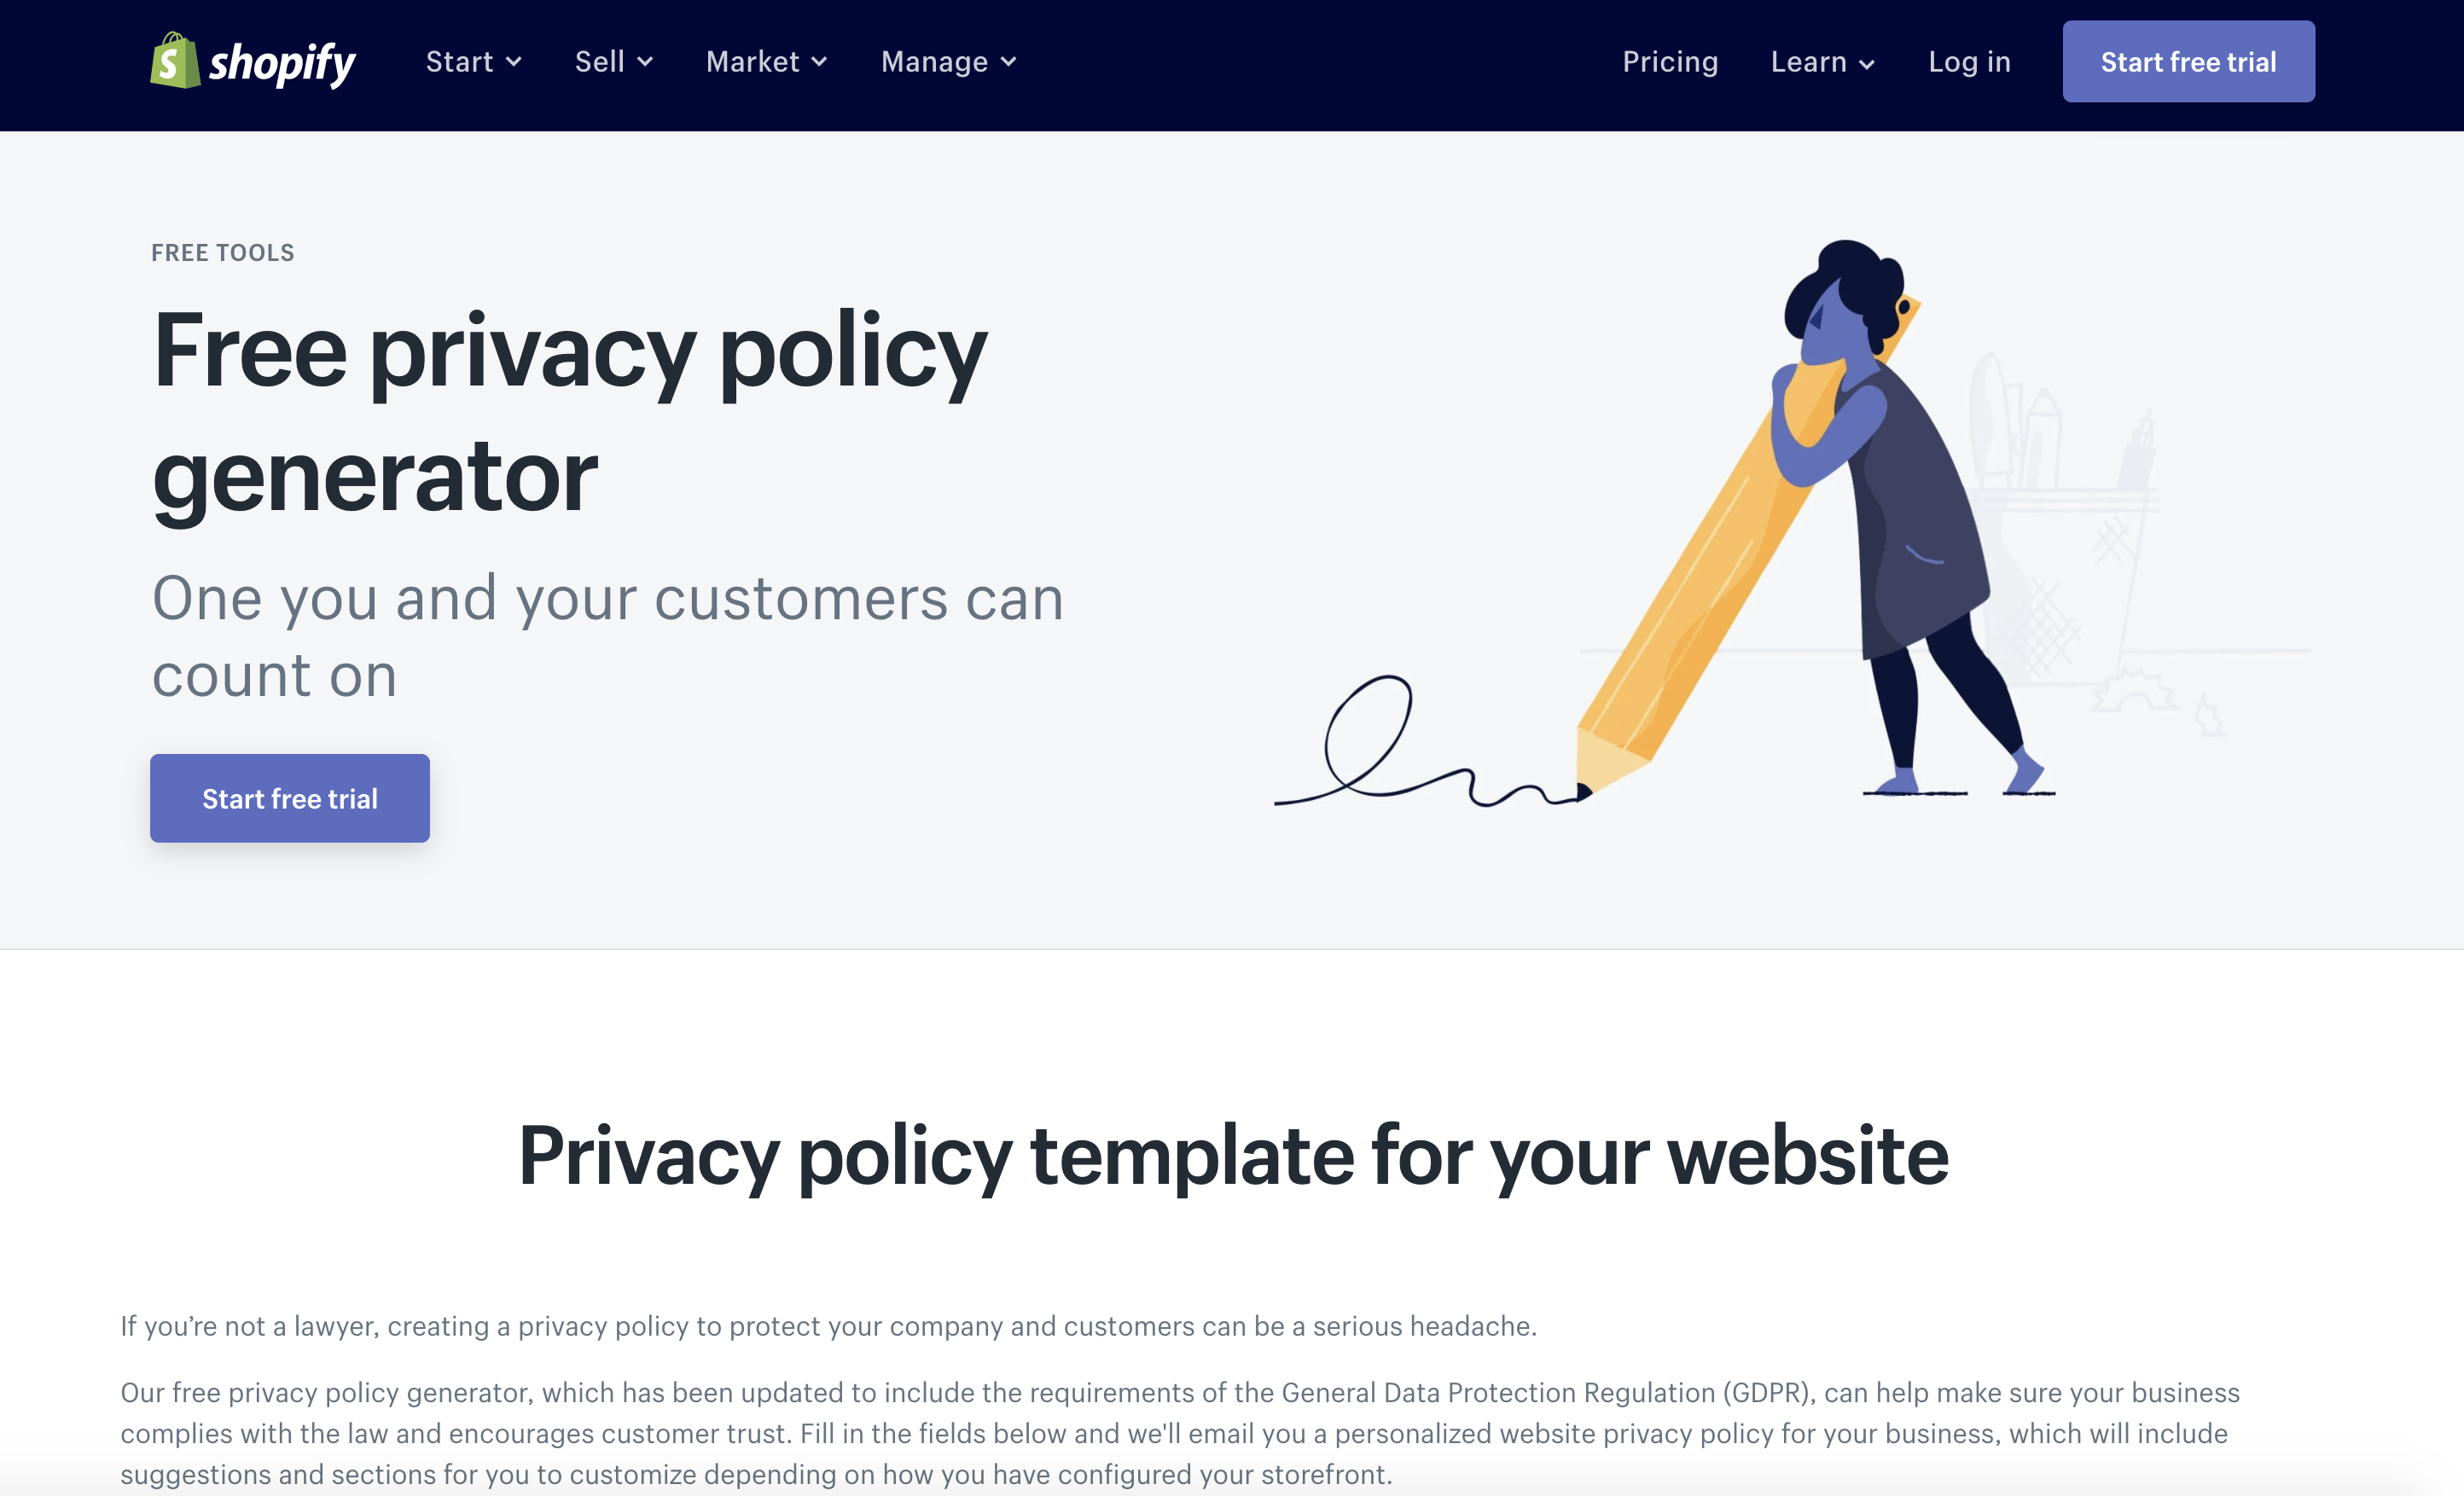 Shopify Privacy Policy Generator